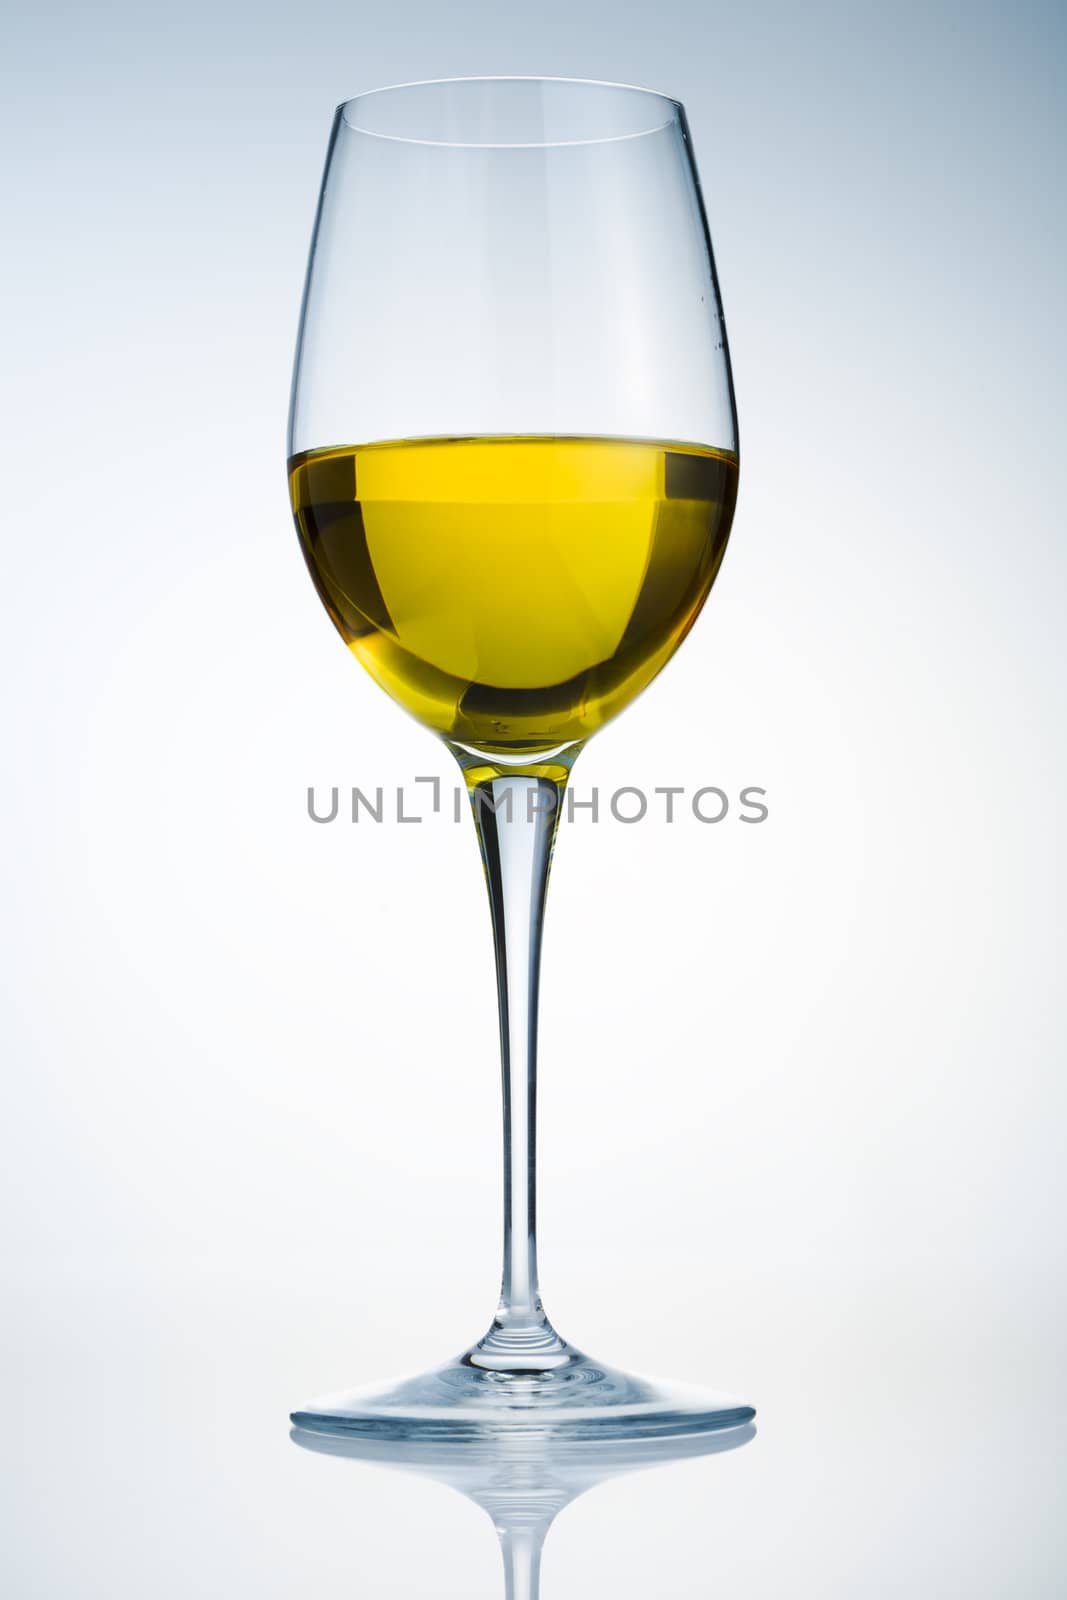 Glass of white wine over a light background